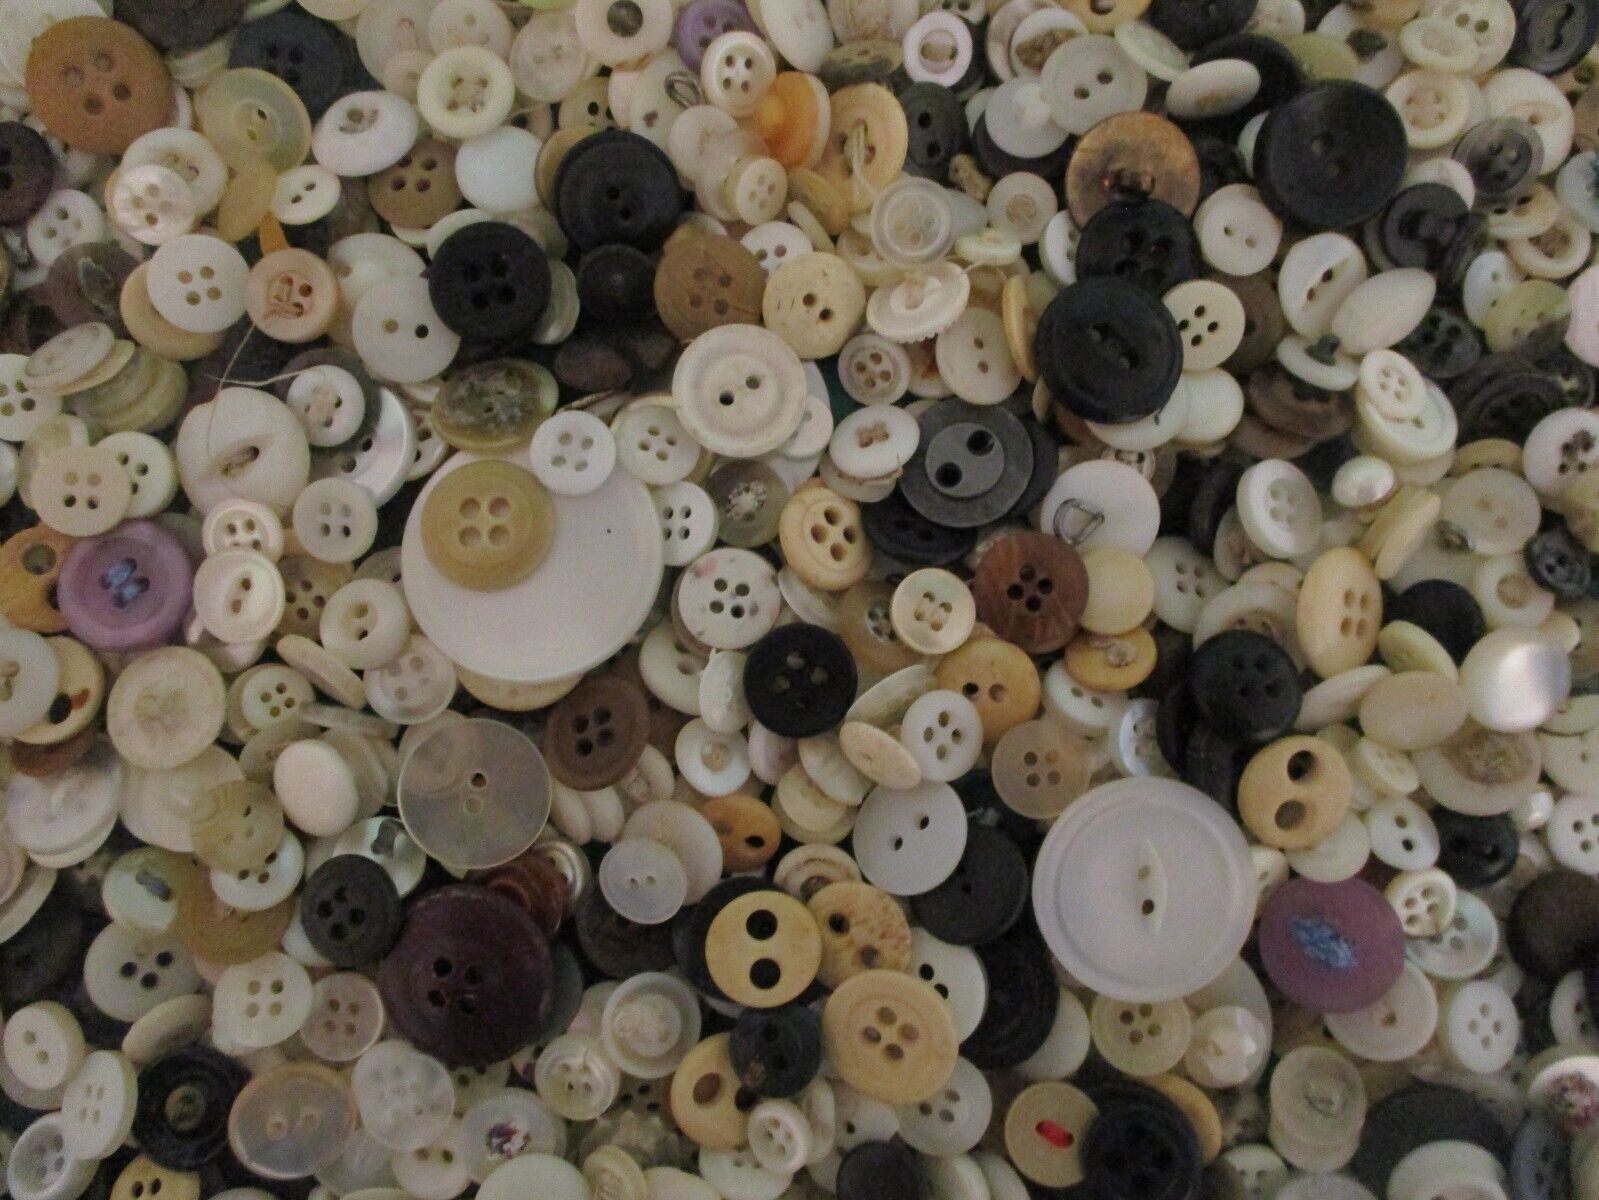 Huge Mixed Lot Vintage Buttons 1 1/2 Lbs. Used Clean Washed White Black Colors